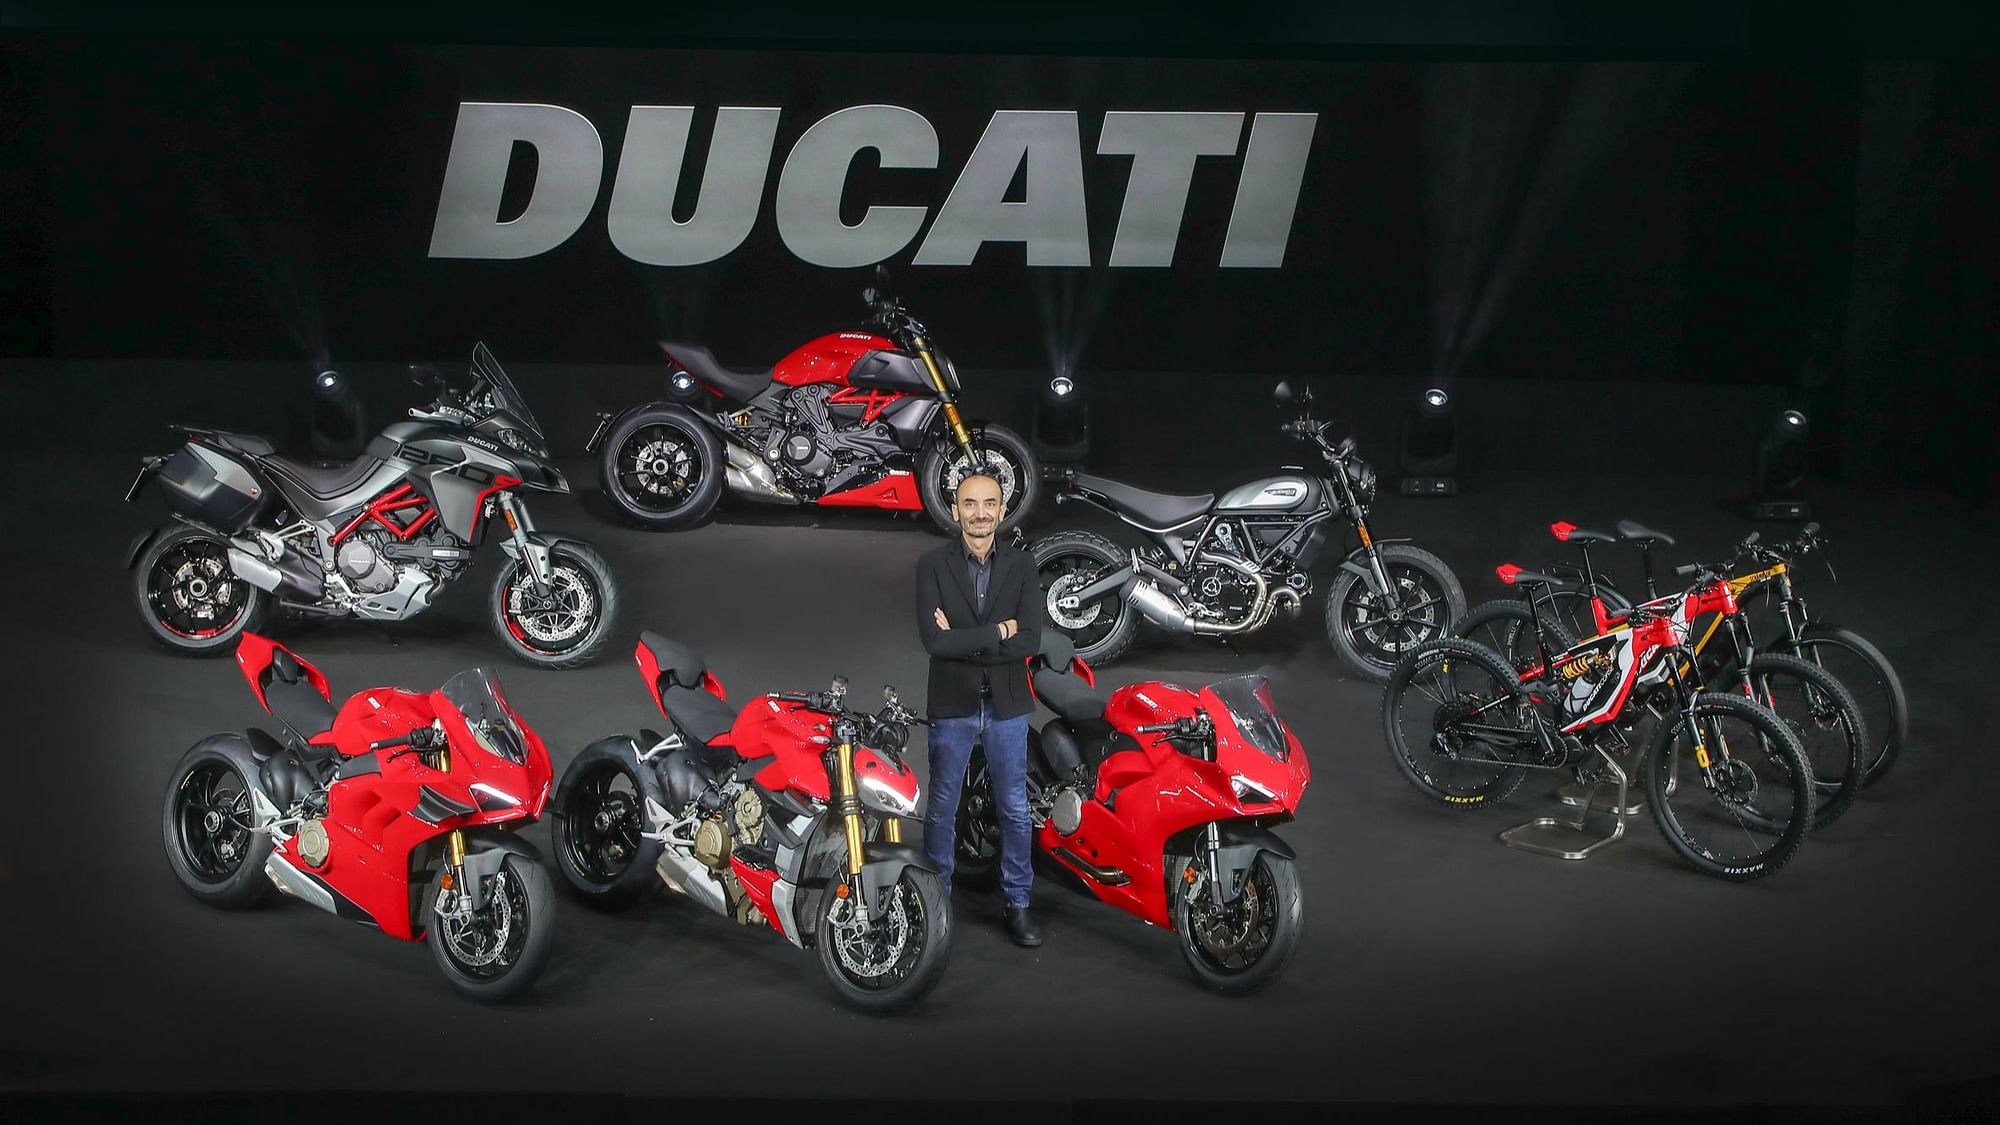 The new Ducati 2020 line-up unveiled, includes electric bicycles.